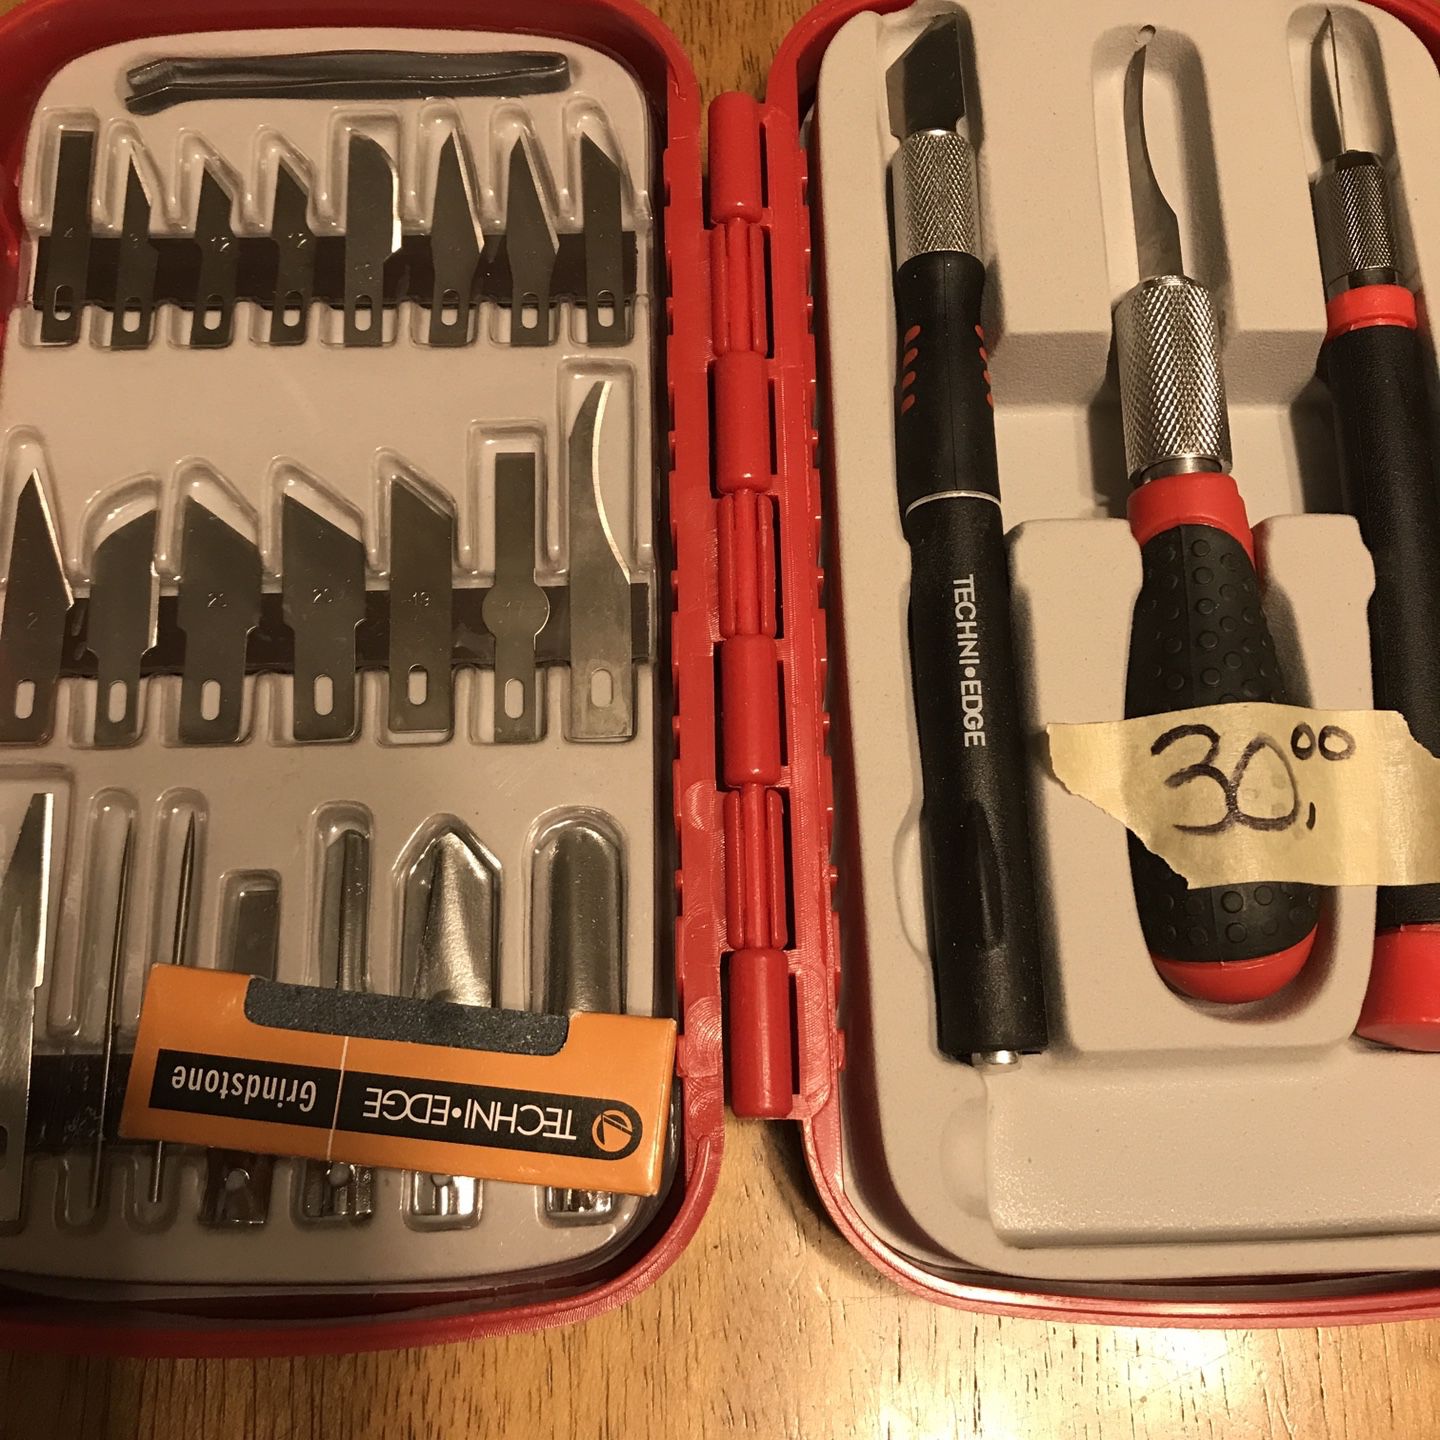 Full coocraft knife Set for Sale in Natick, MA - OfferUp